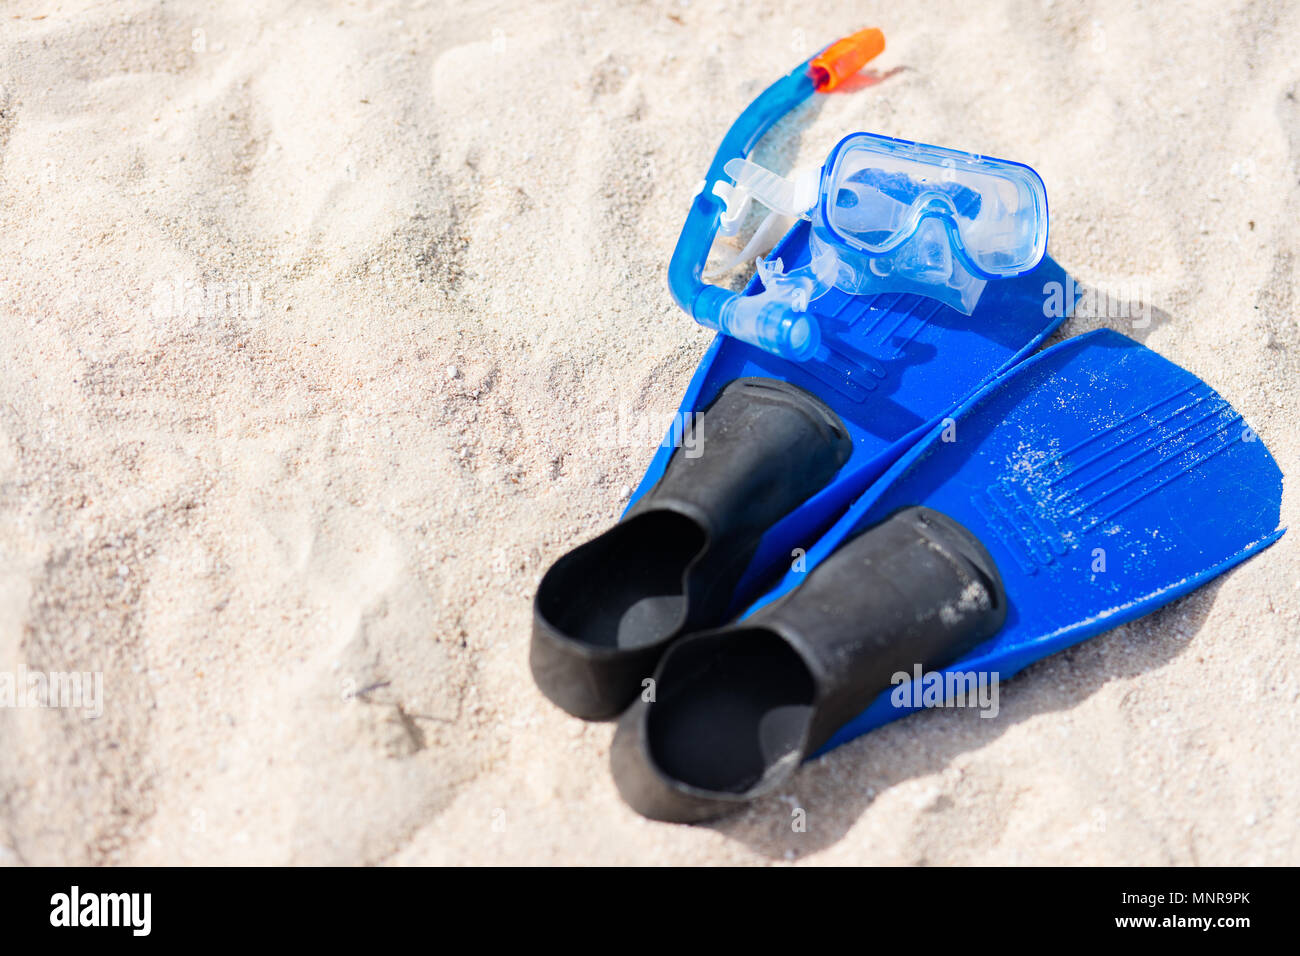 Snorkeling equipment mask, snorkel and fins on sand at beach Stock Photo